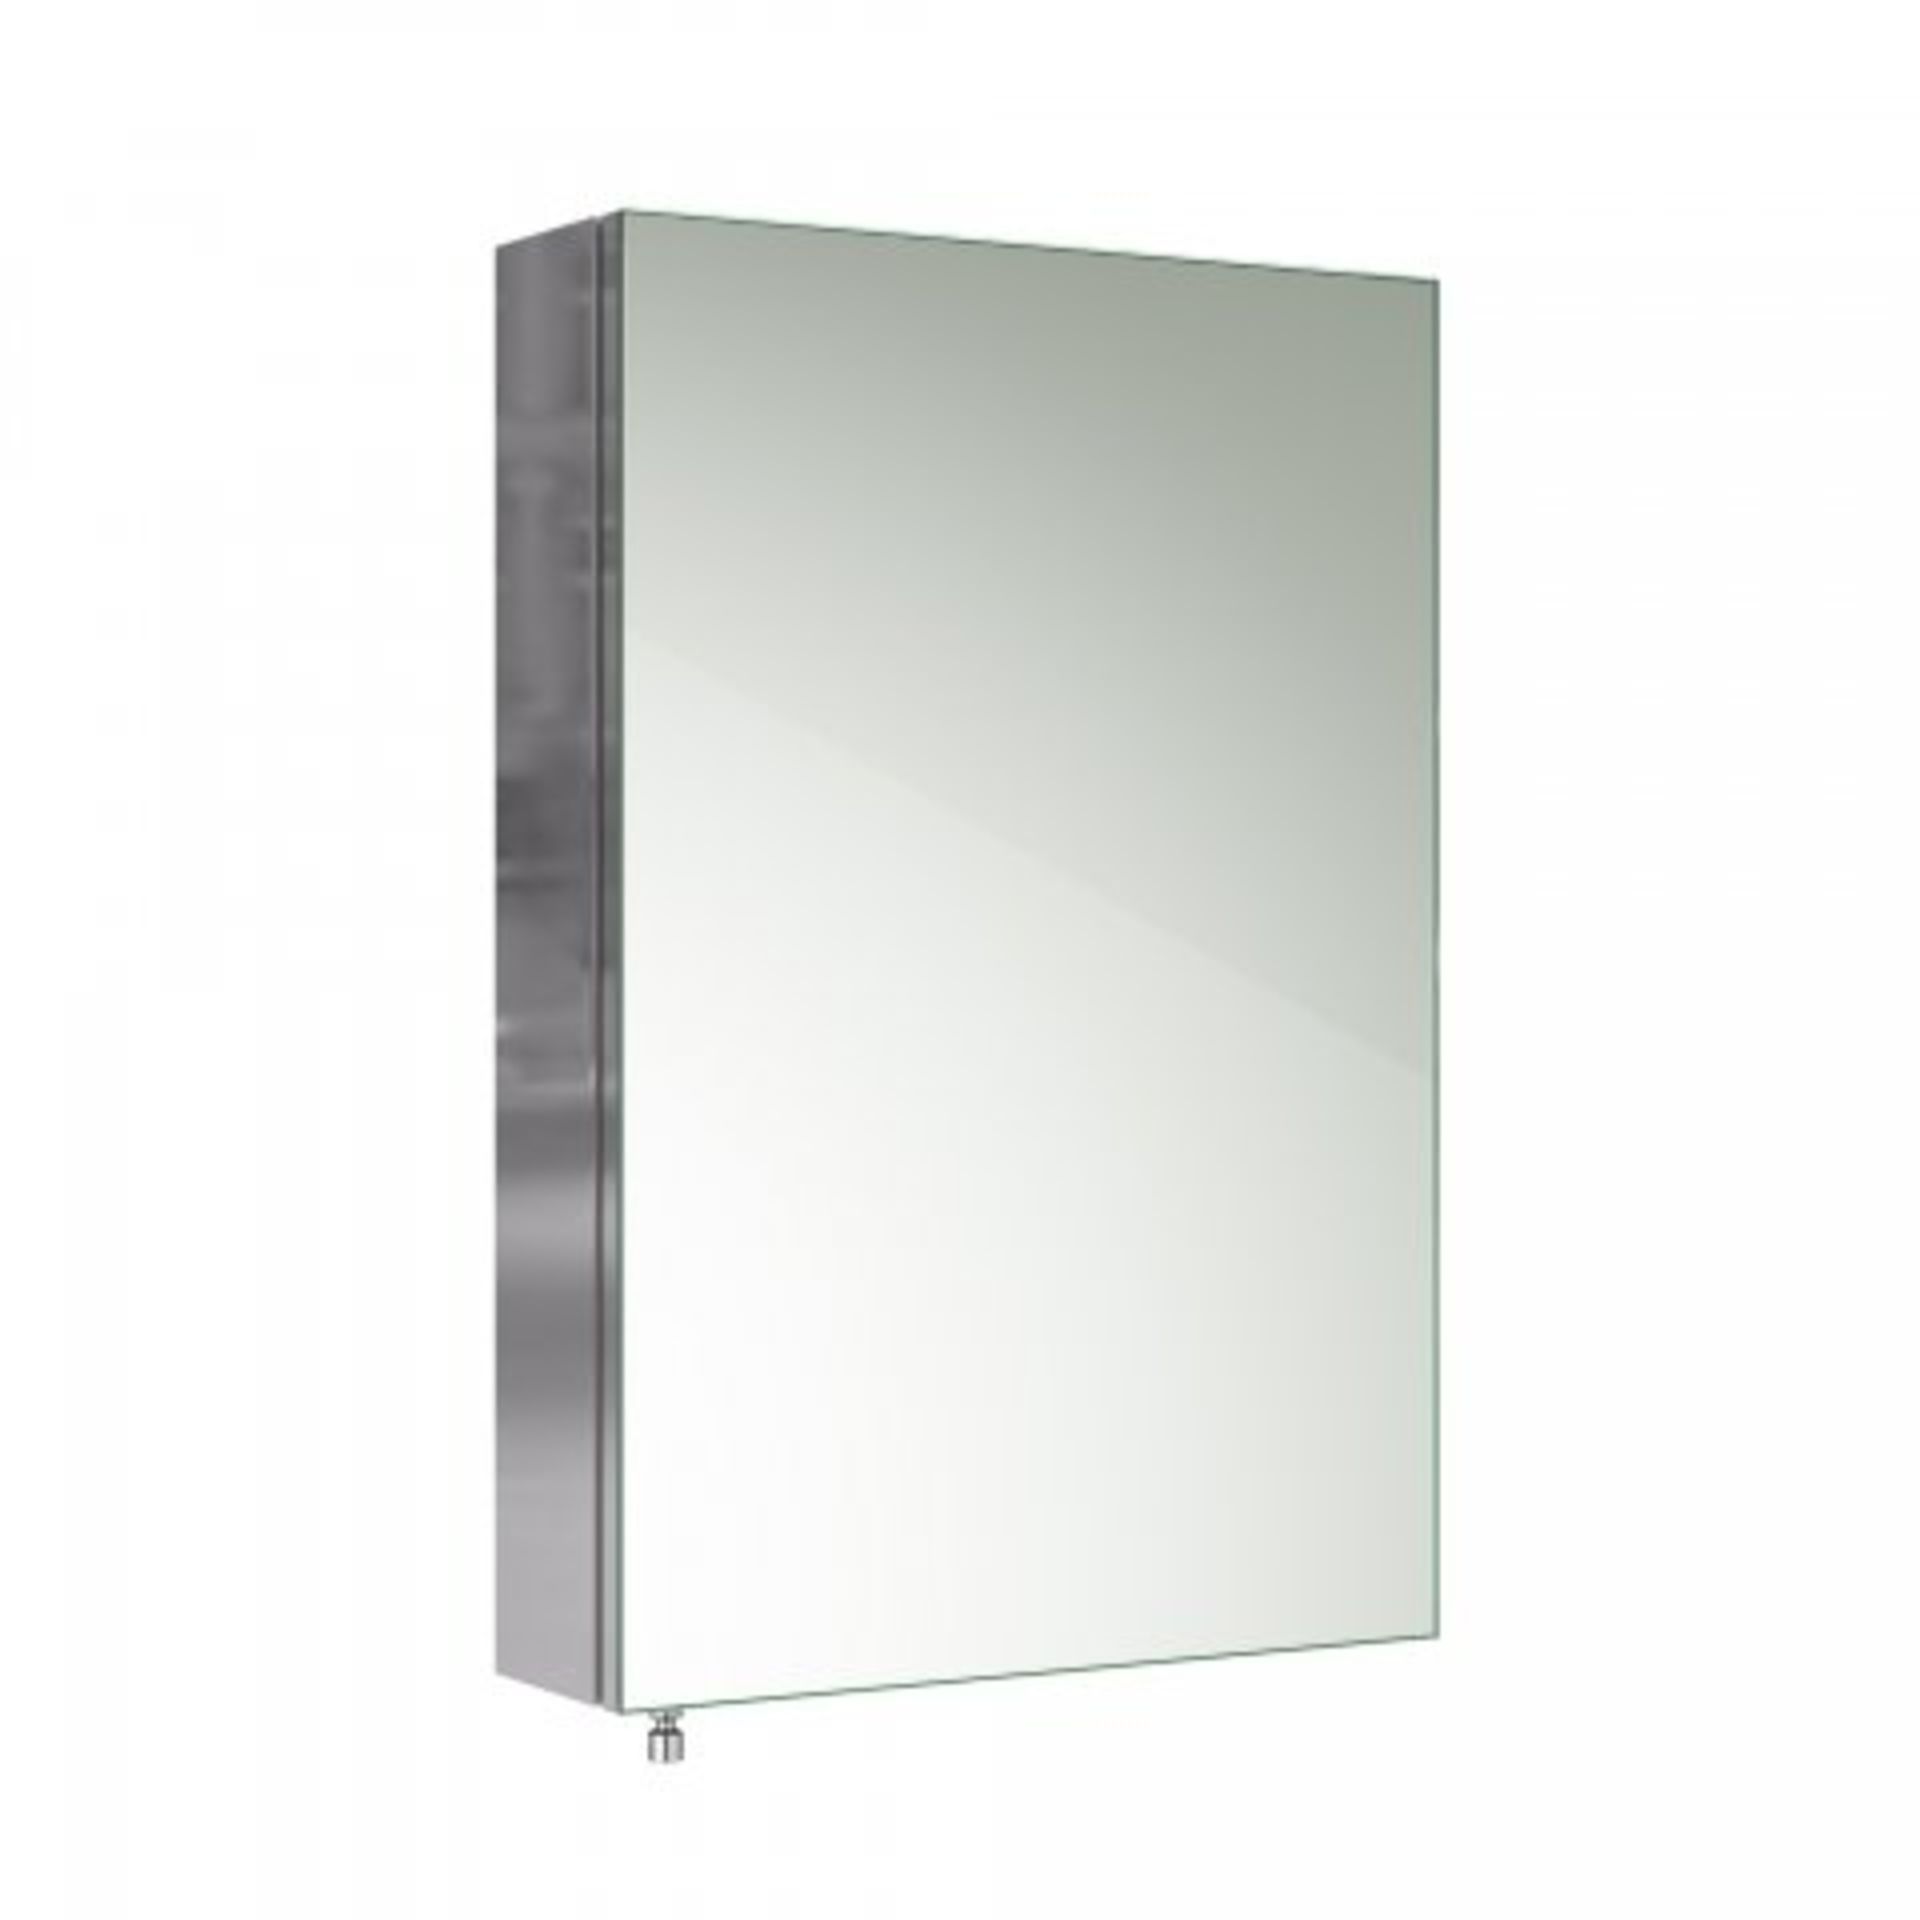 (N220) 600x400mm Liberty Stainless Steel Single Door Mirror Cabinet RRP £249.99 Perfect Reflection - Image 4 of 4